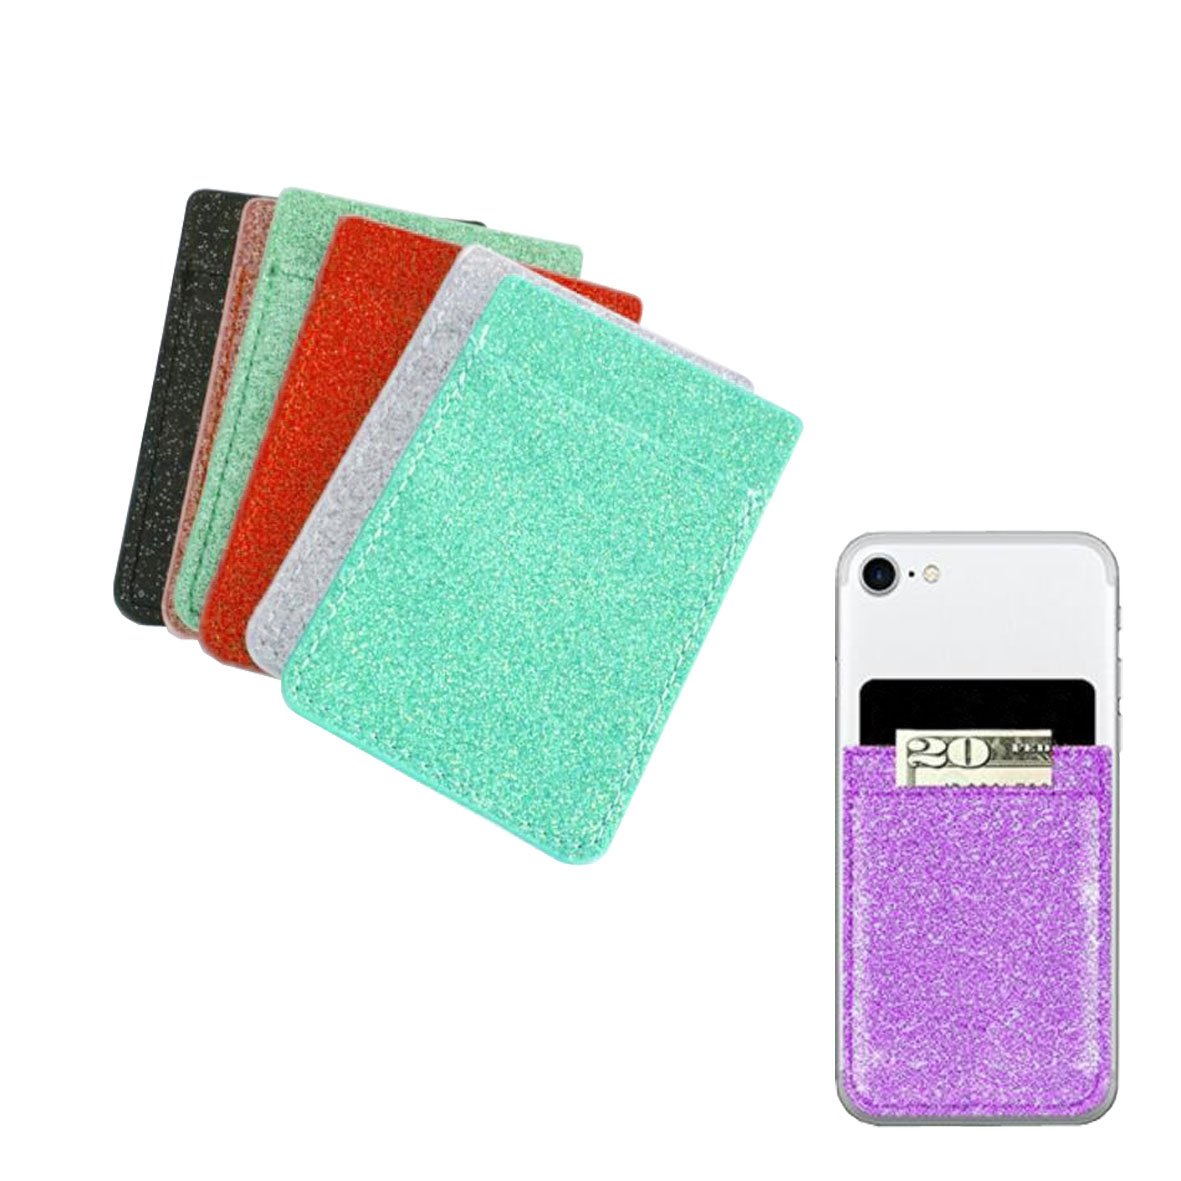 GL-AAA1349 Glitter Leatherete Adhesive Cell Phone Wallet